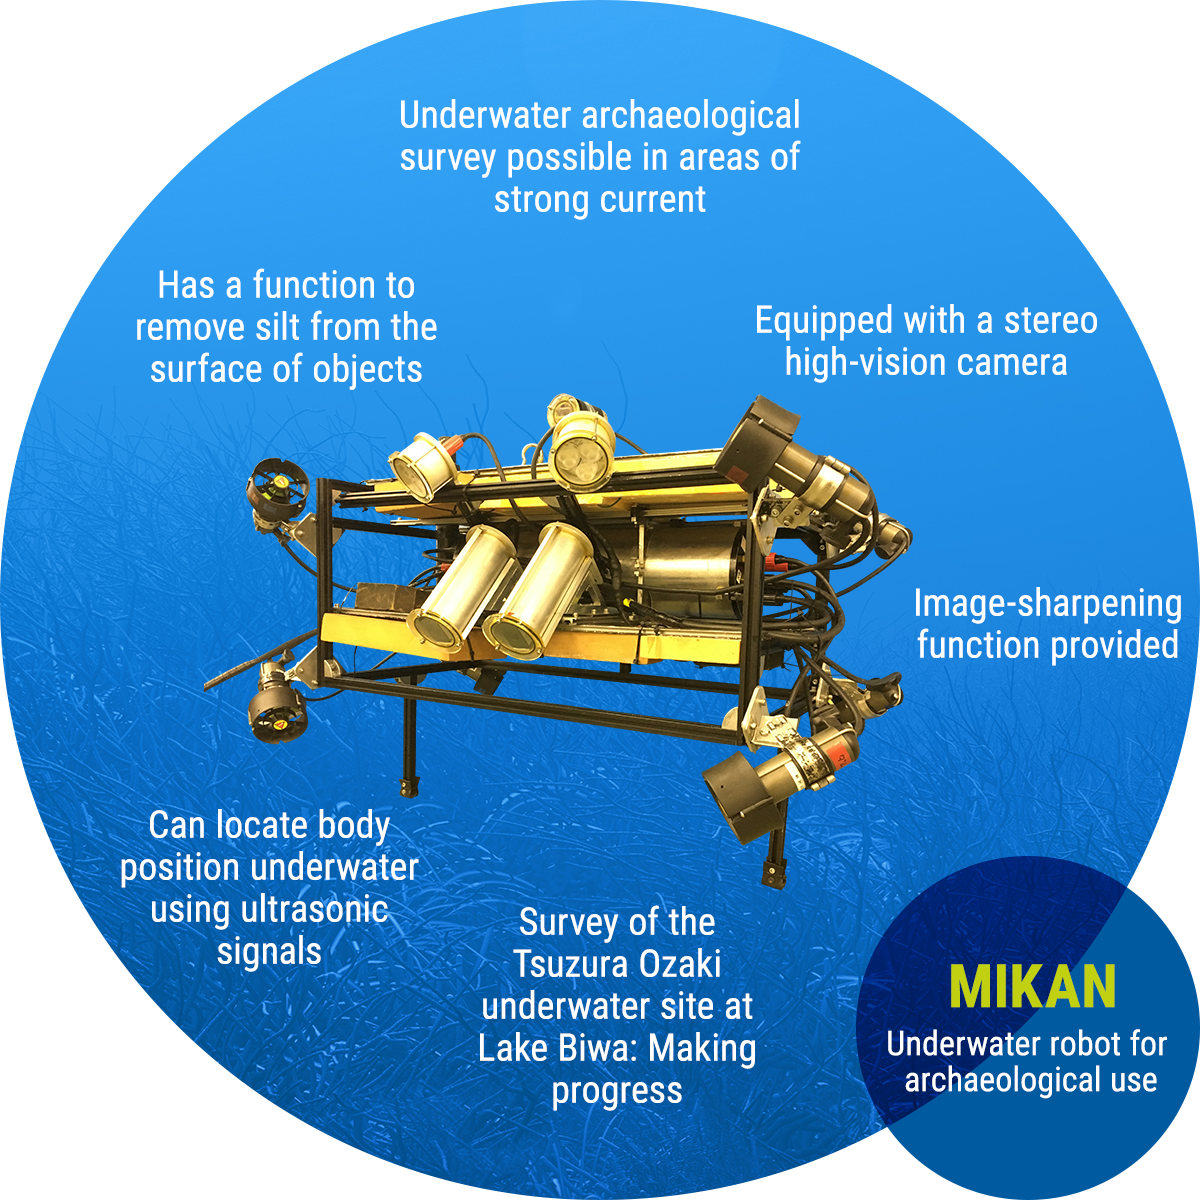 MIKAN: Underwater robot for archaeological use